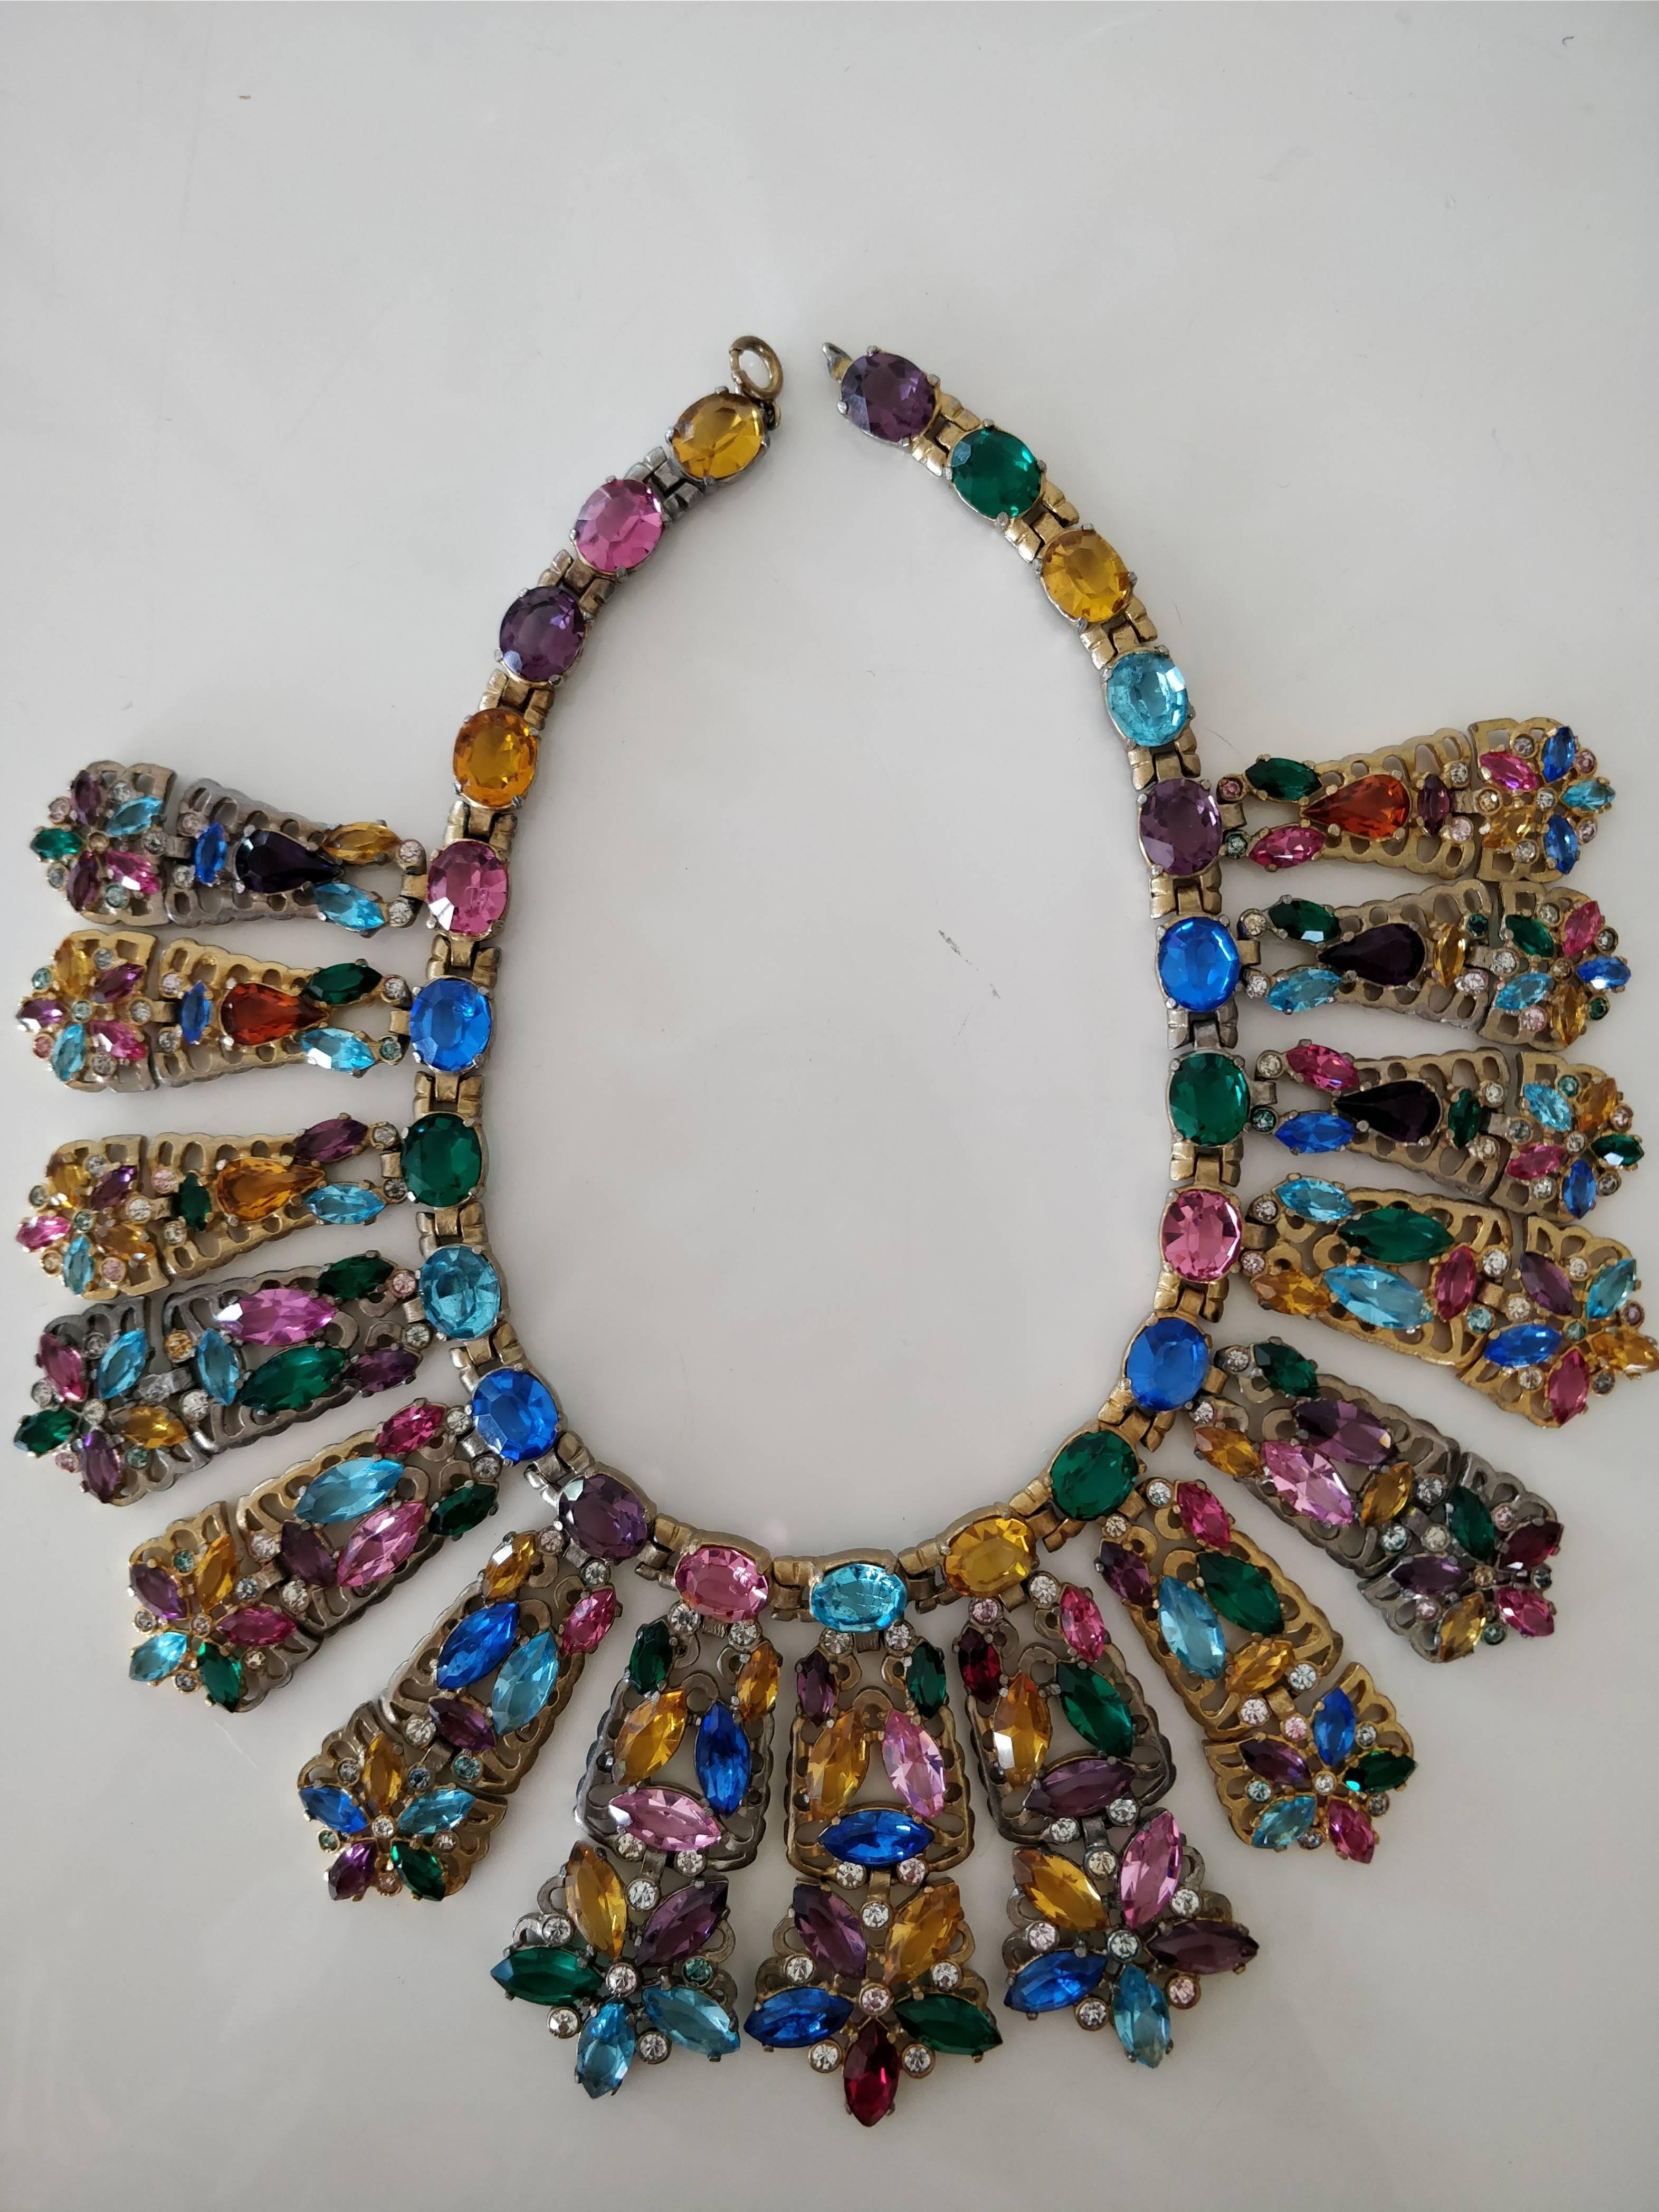 1940s Stained Glass Window effect, large multi-color rhinestone collar necklace. Gold-tone, open-back setting.  Larger drops are hinged for movement. 9 gorgeous colors.  Spring lock closure. Unmarked as to maker. 2.5 inch long center drop.  Neck